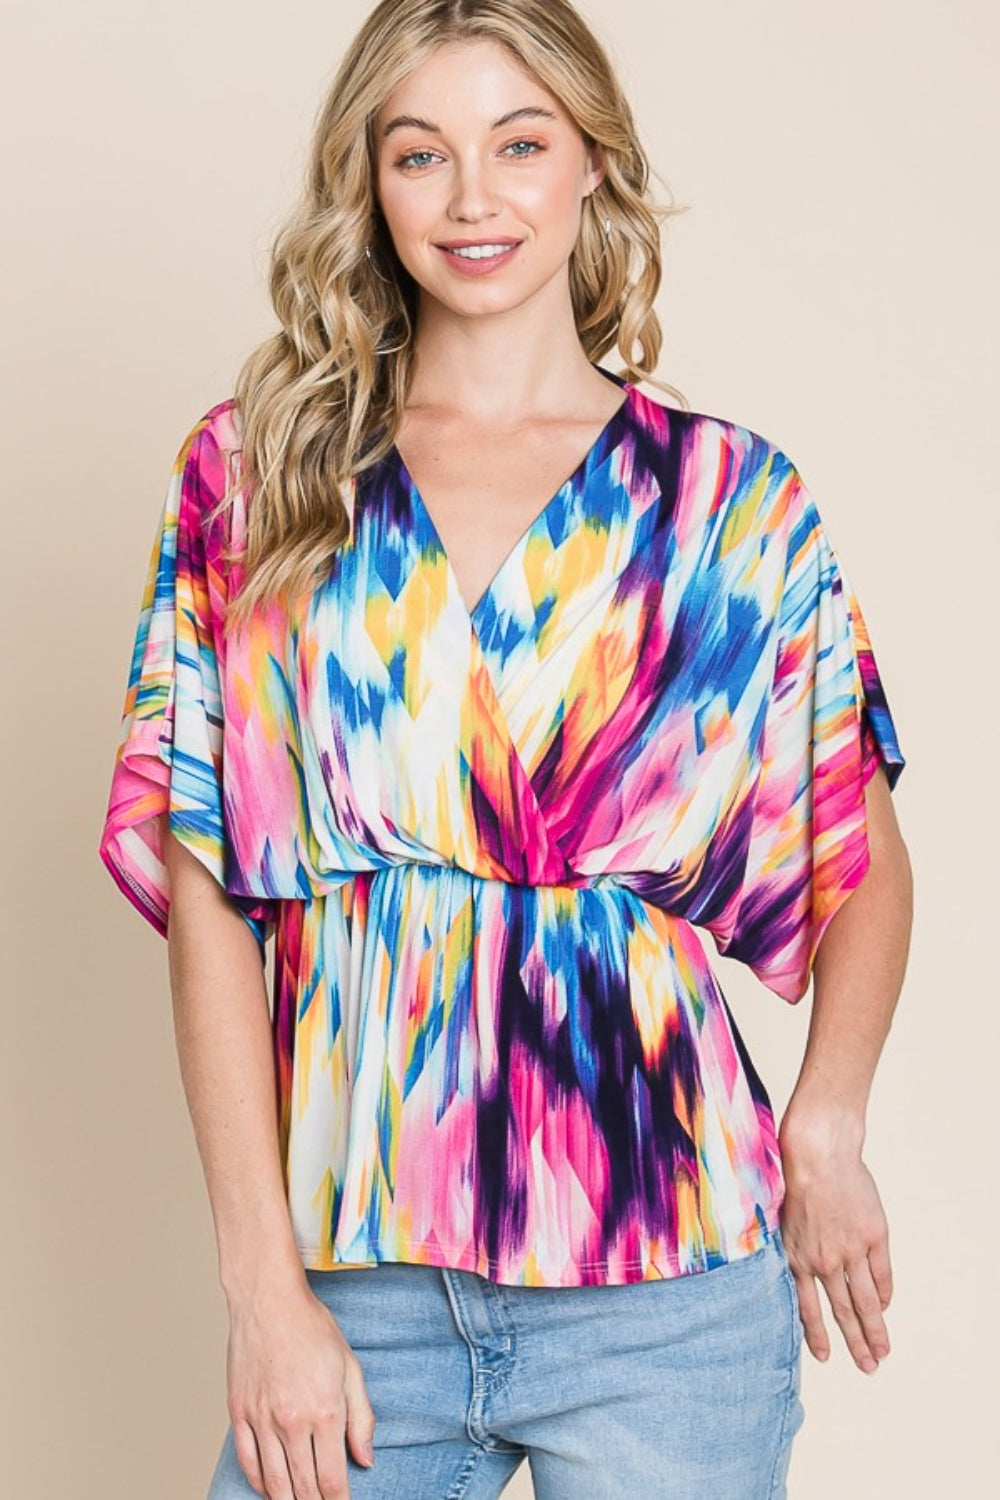 BOMBOM Printed Surplice Peplum Blouse-Short Sleeve Tops-Inspired by Justeen-Women's Clothing Boutique in Chicago, Illinois